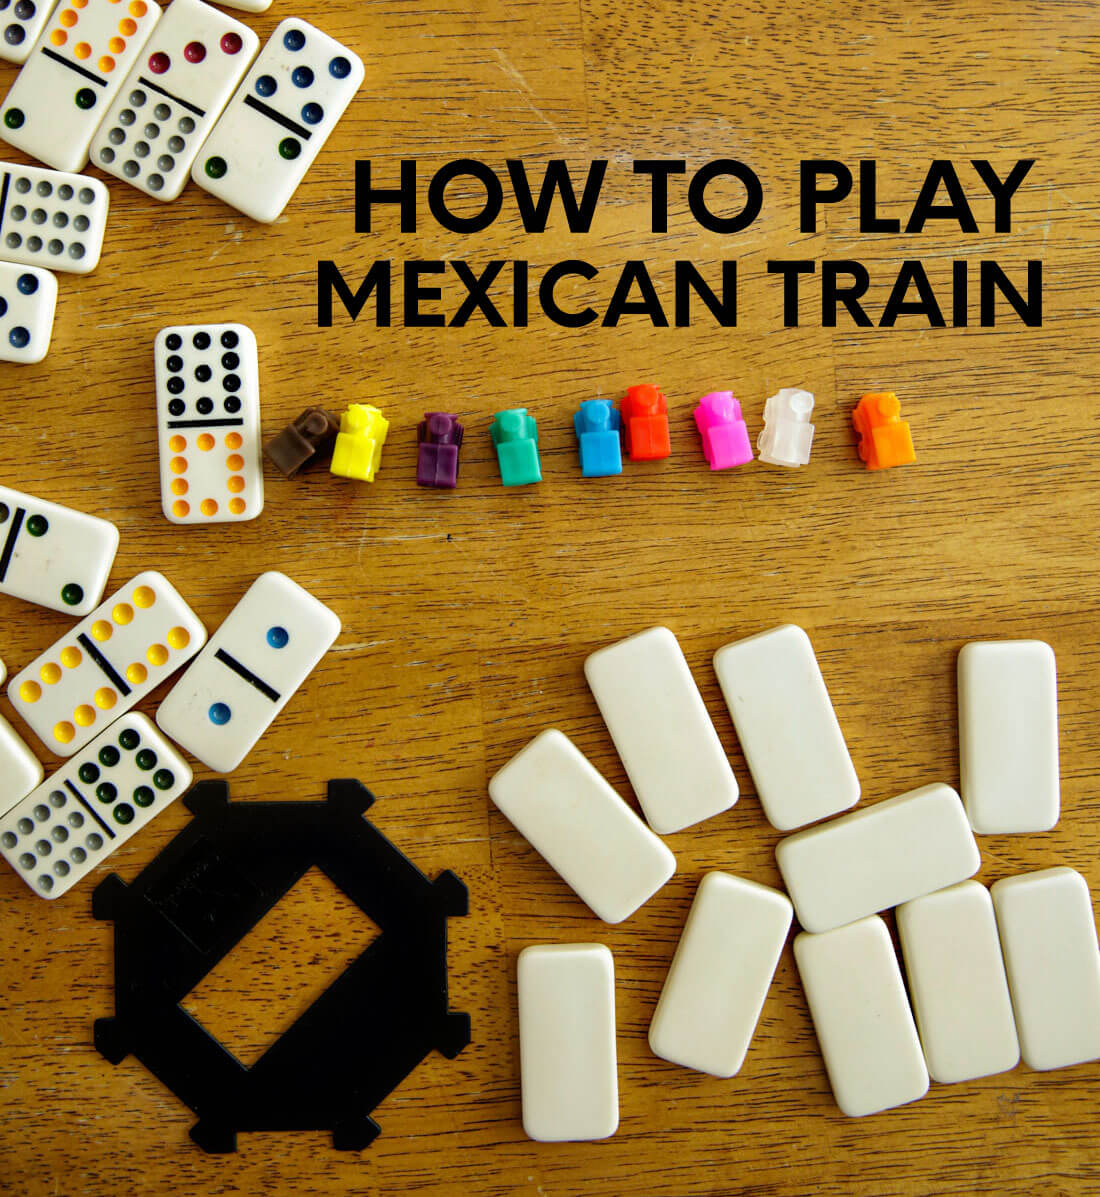 How to Play Mexican Train